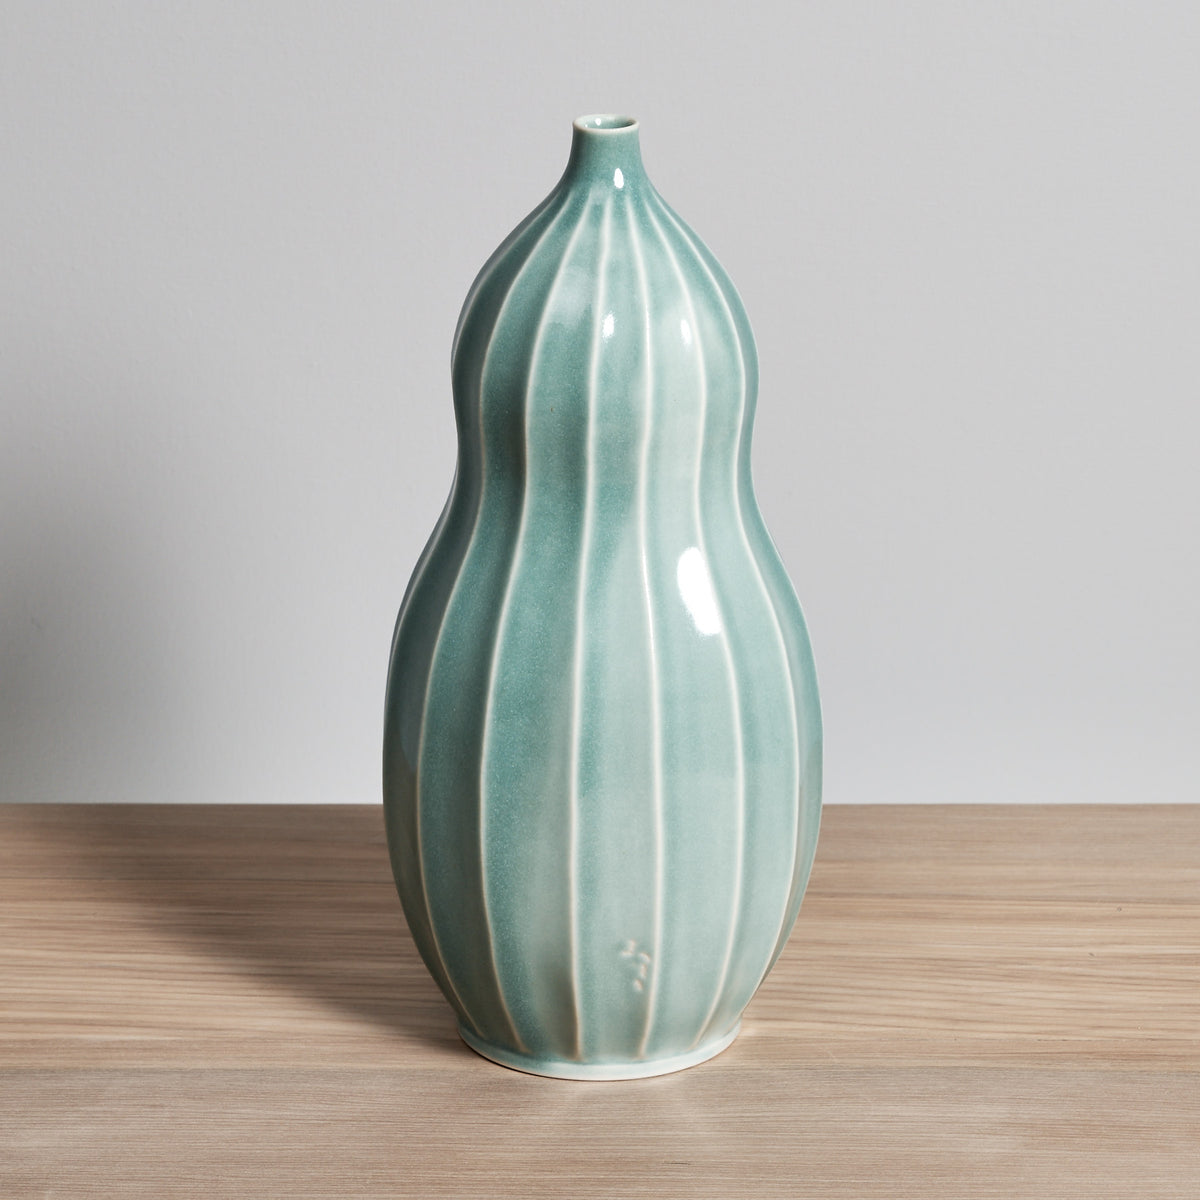 A Gourd Vase - Celadon by Jino Ceramic Studio on a wooden table.